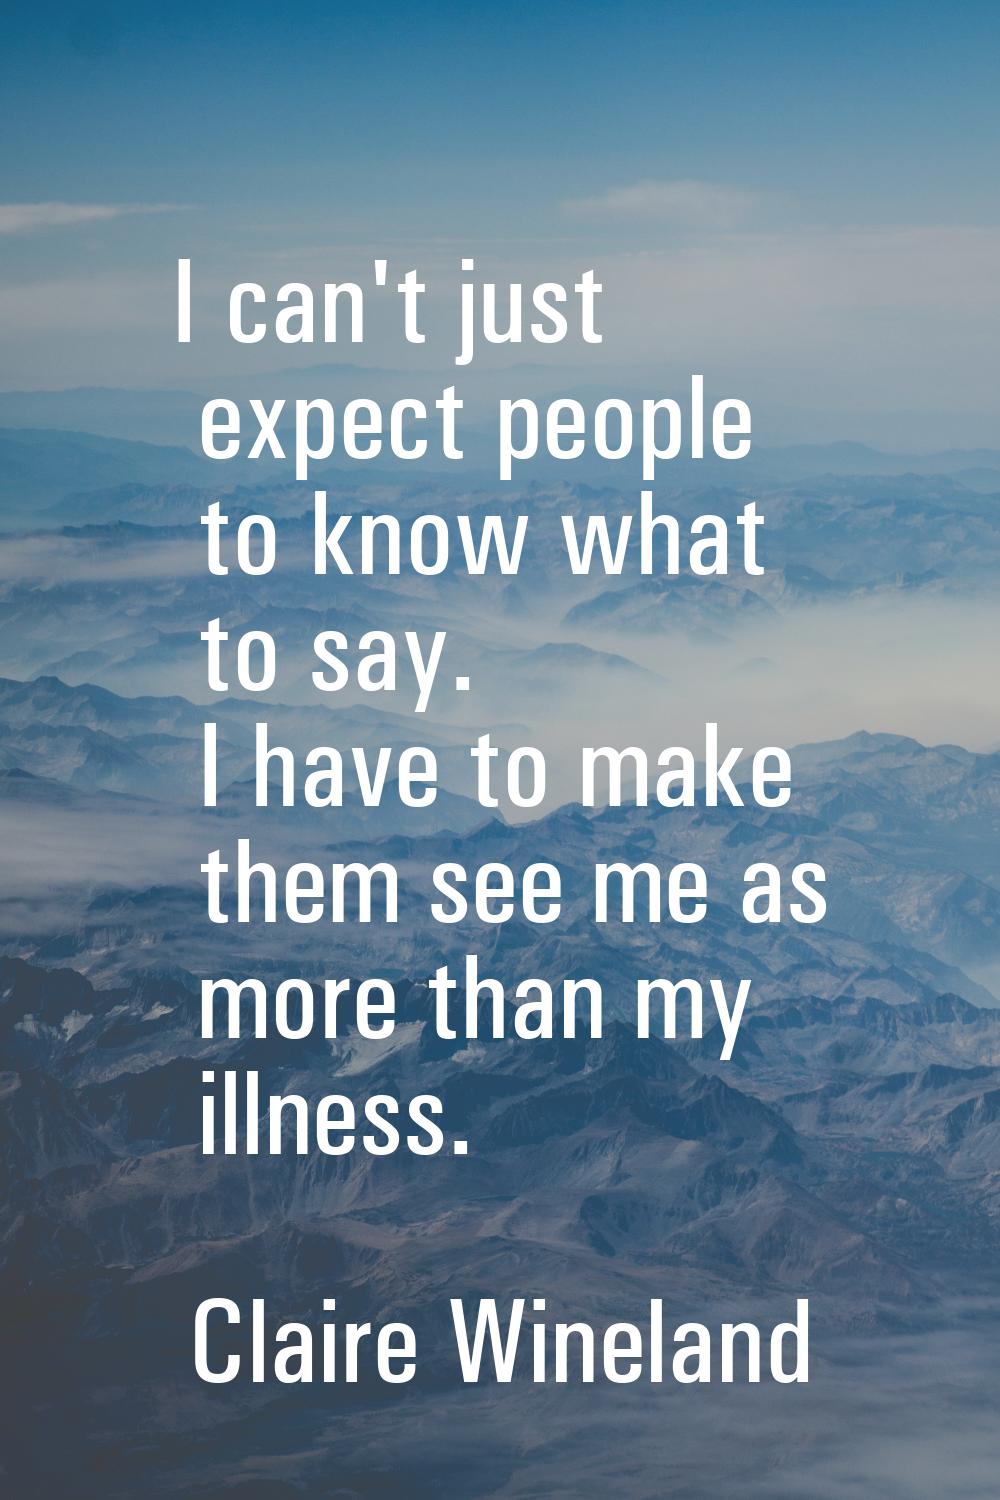 I can't just expect people to know what to say. I have to make them see me as more than my illness.